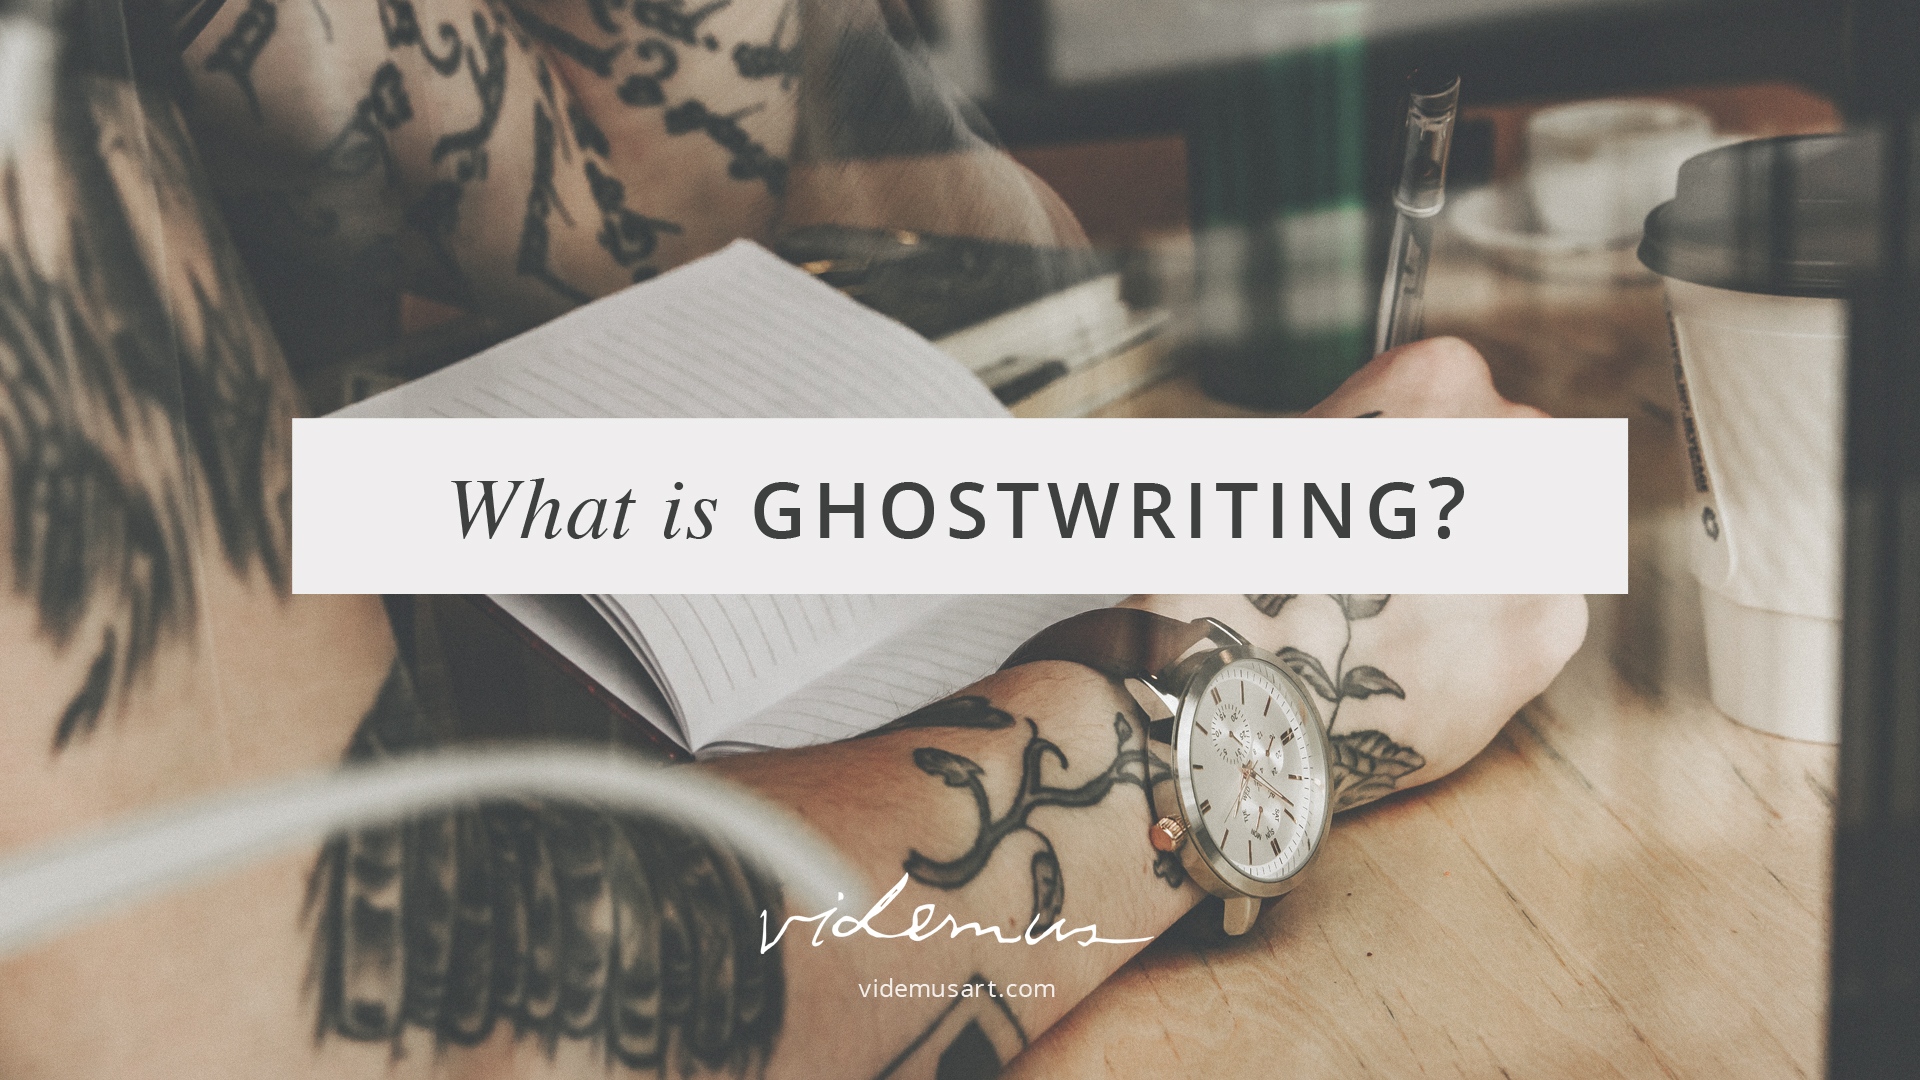 What the heck is ghostwriting?